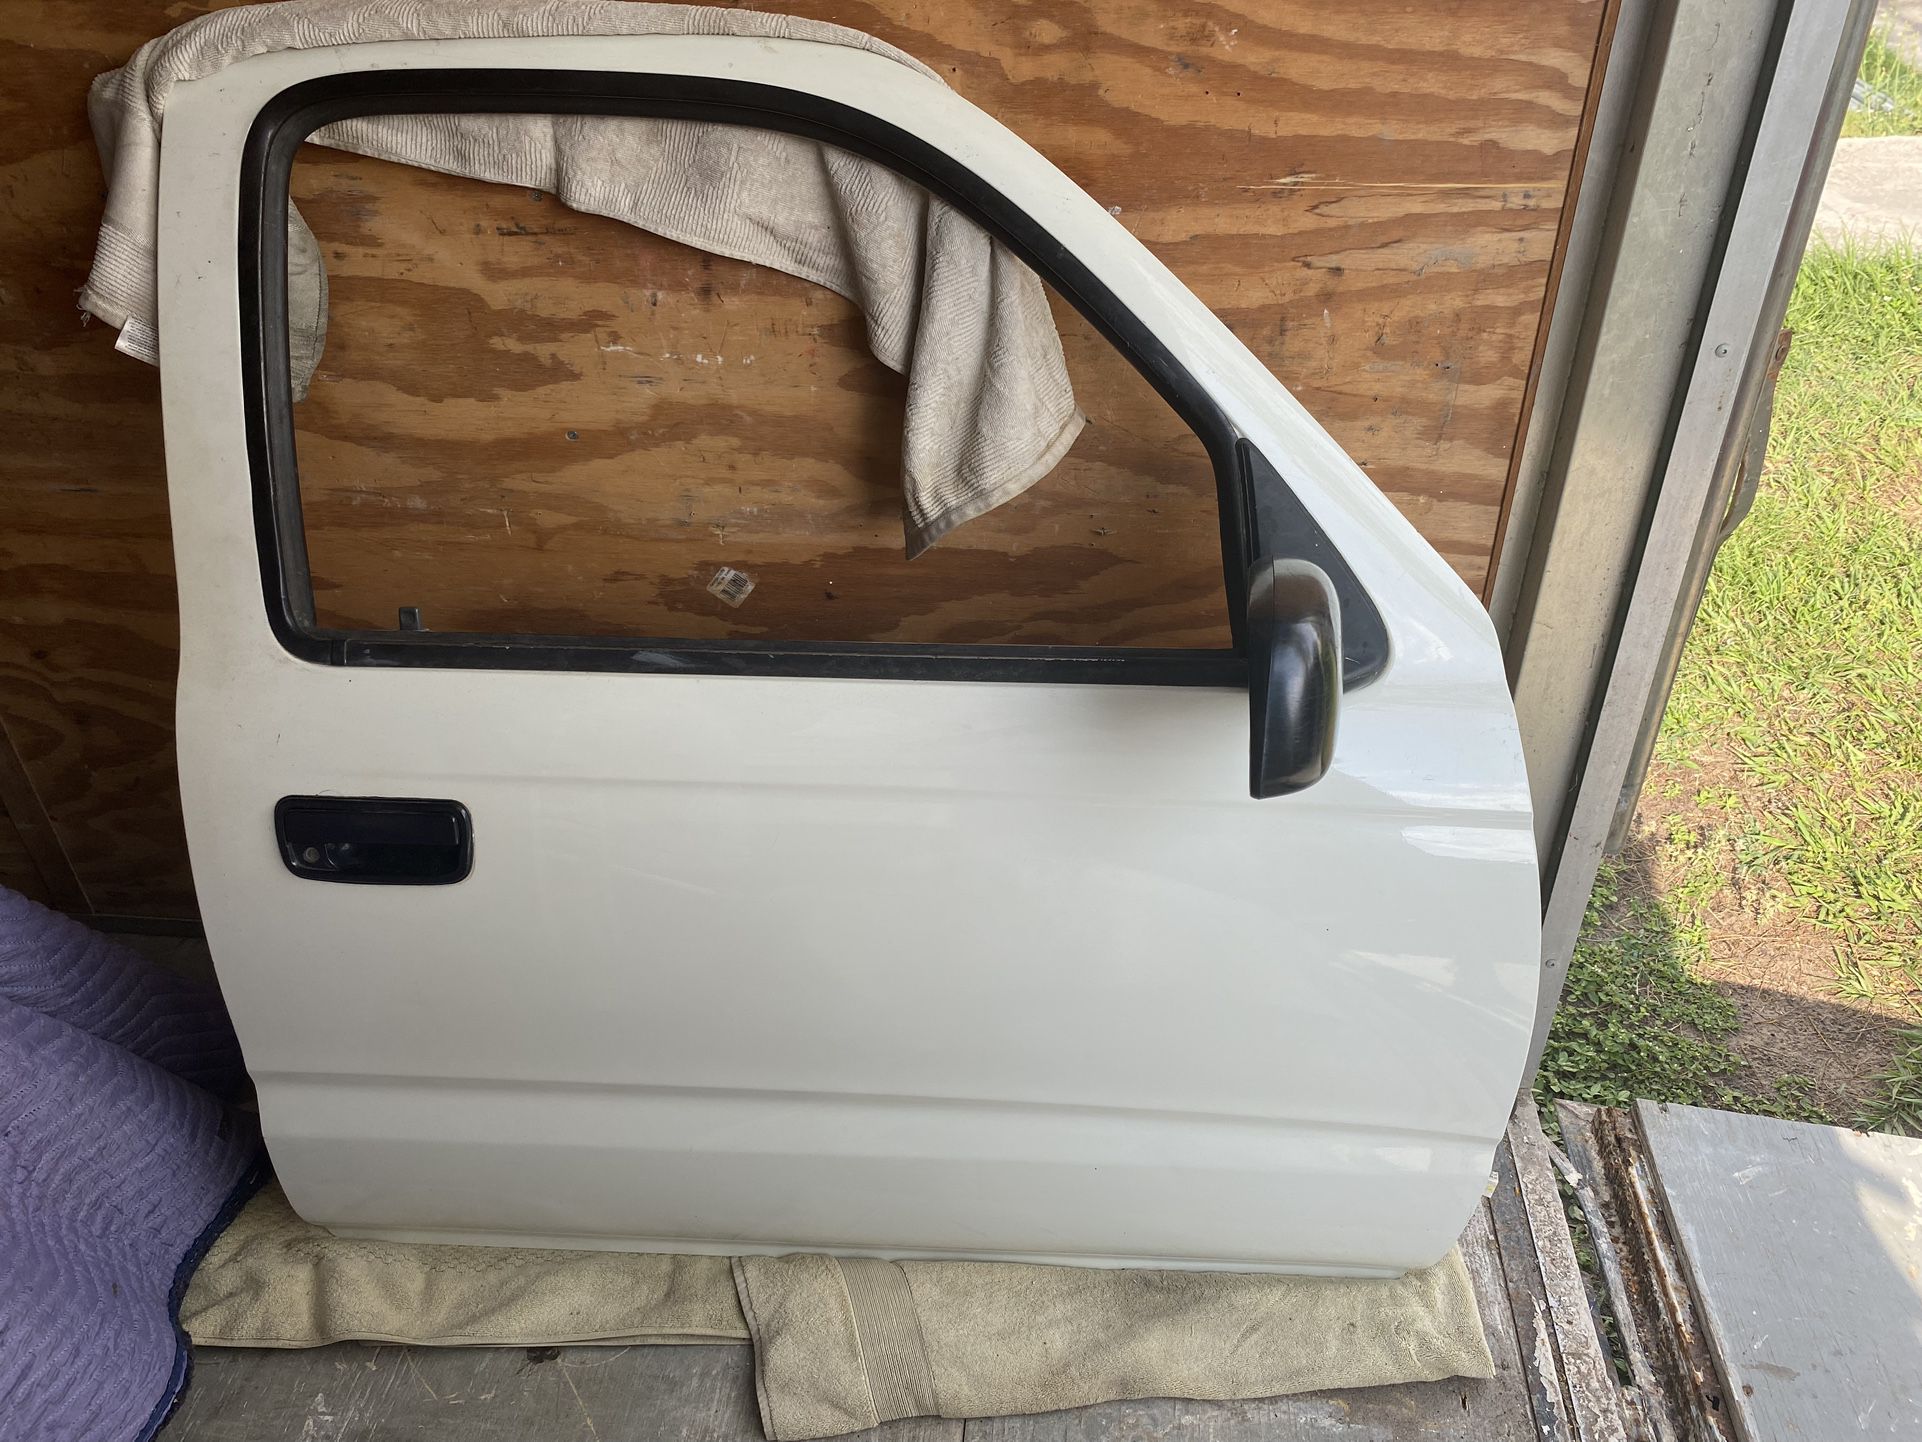 Toyota Tacoma 1995 To 2004 Front Passenger Door.